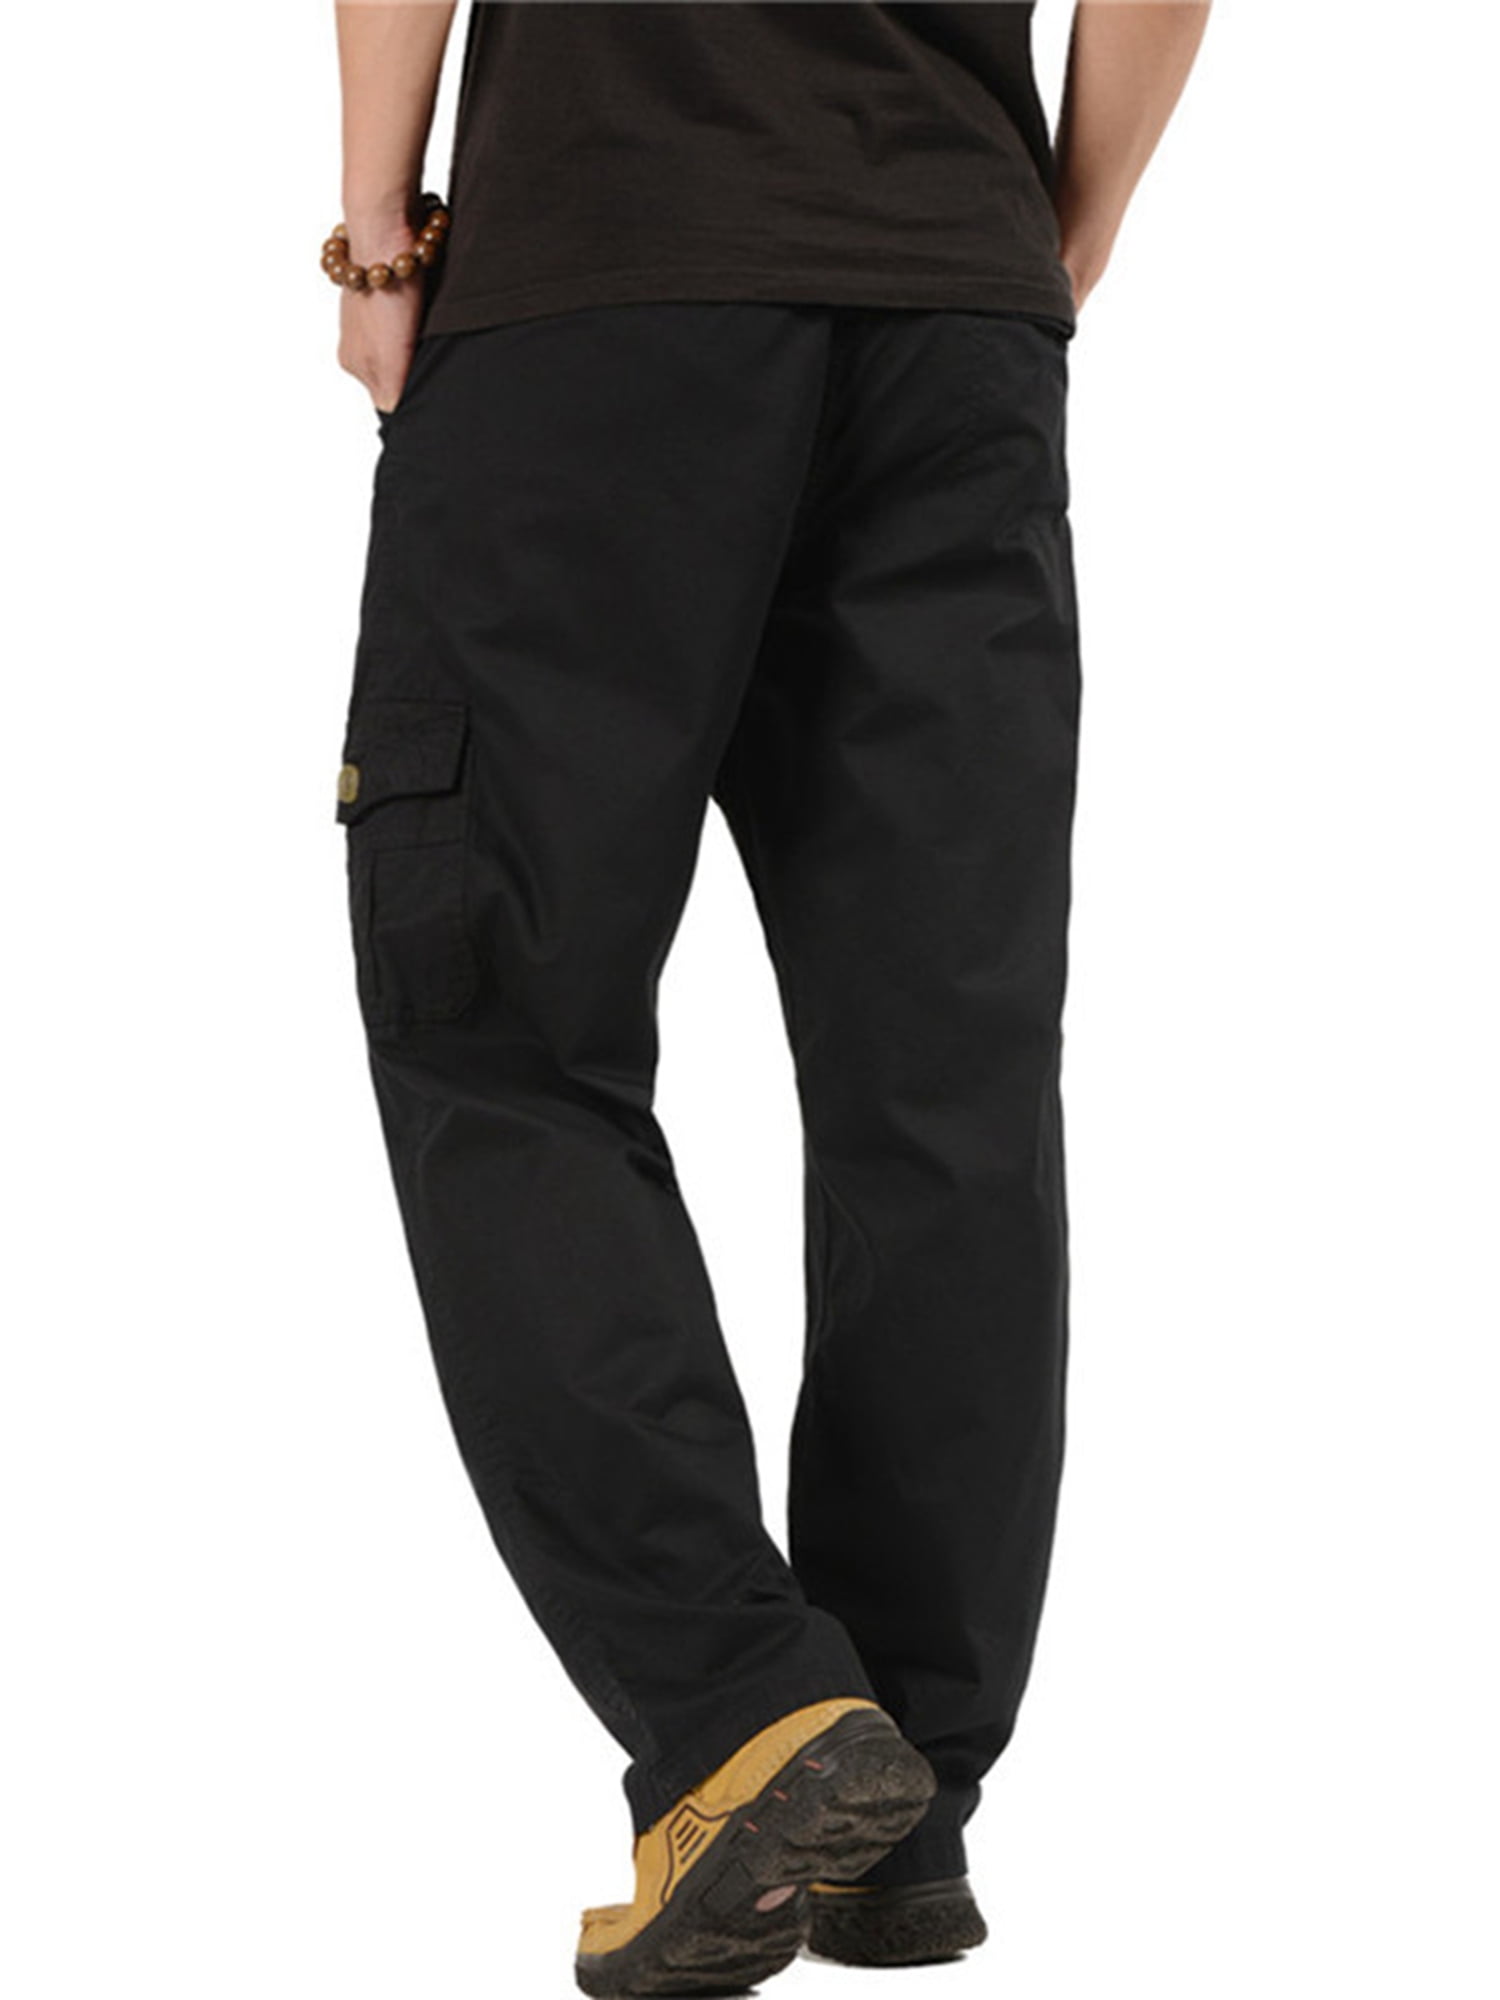 Cathery Mens Loose Comfort Solution Series Cargo Pants Lightweight Elastic Waist Solid Color